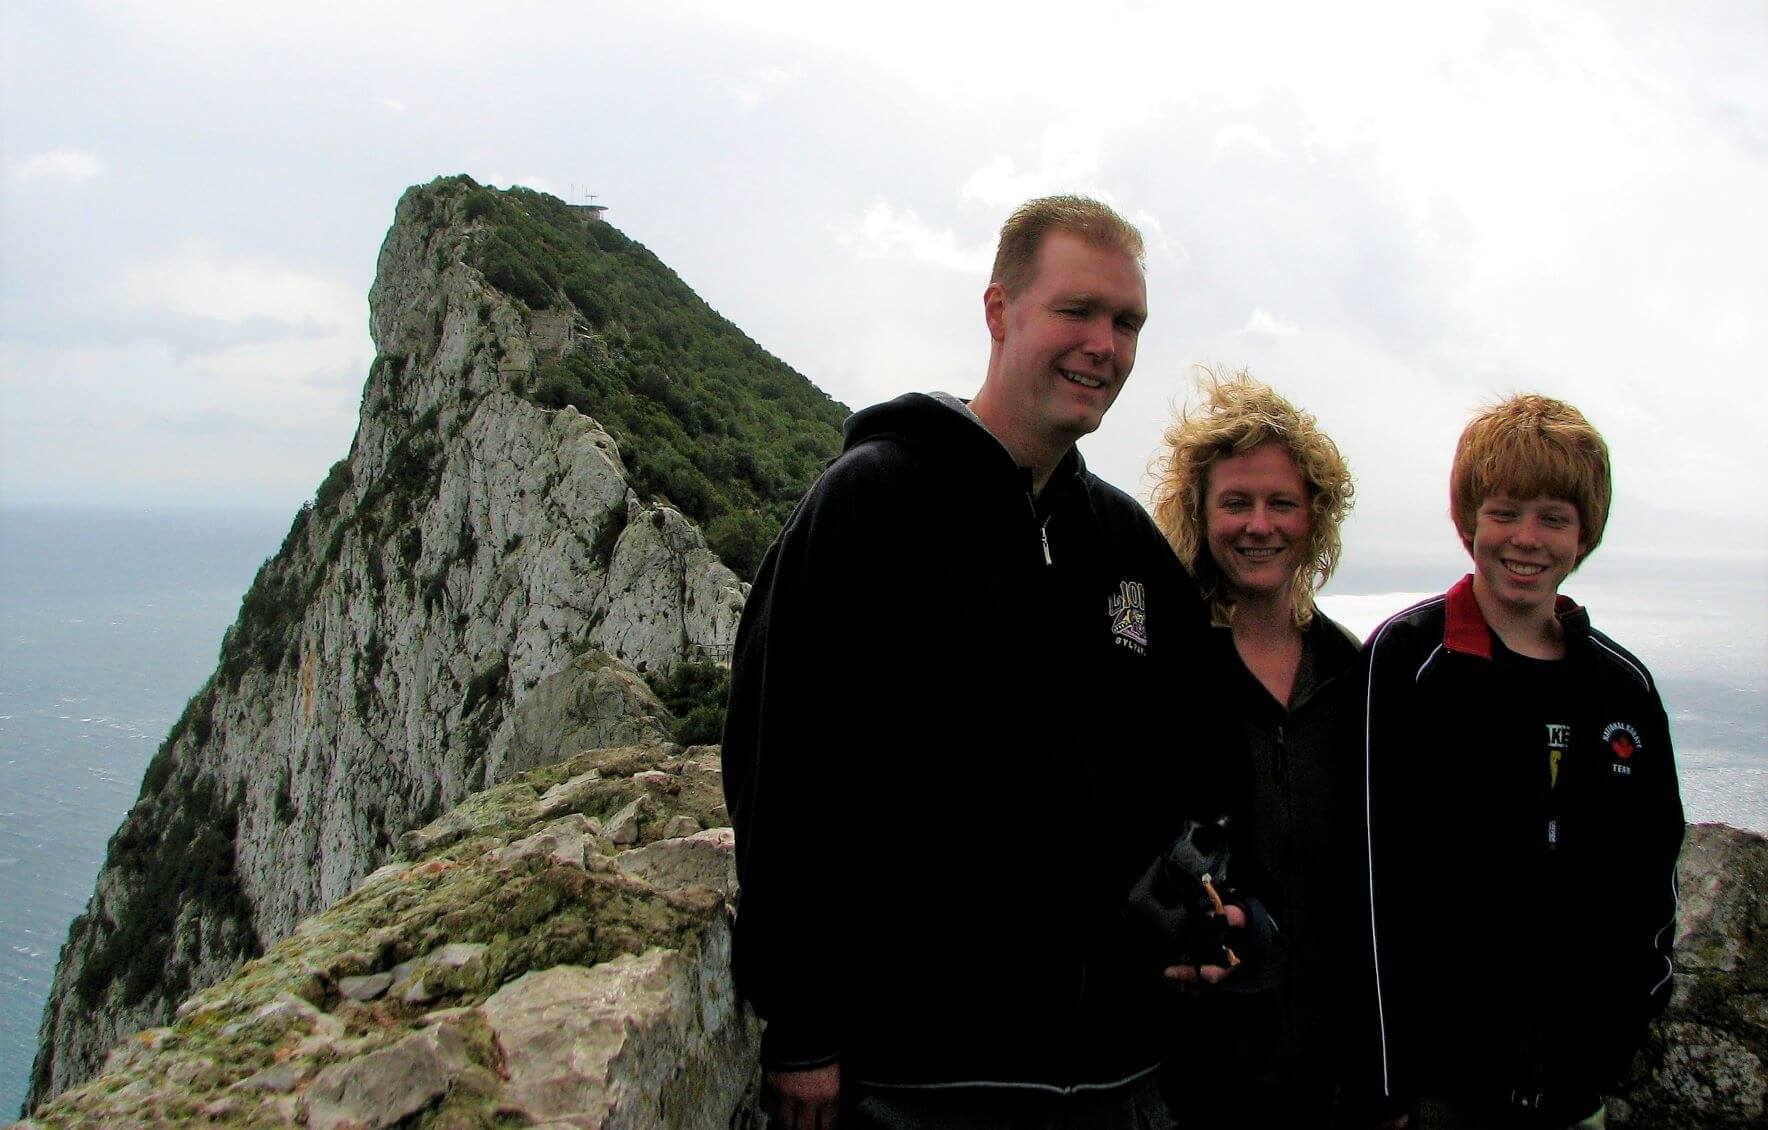 three people, a father, mother and son standing at the top of the Rock of Gibraltar.